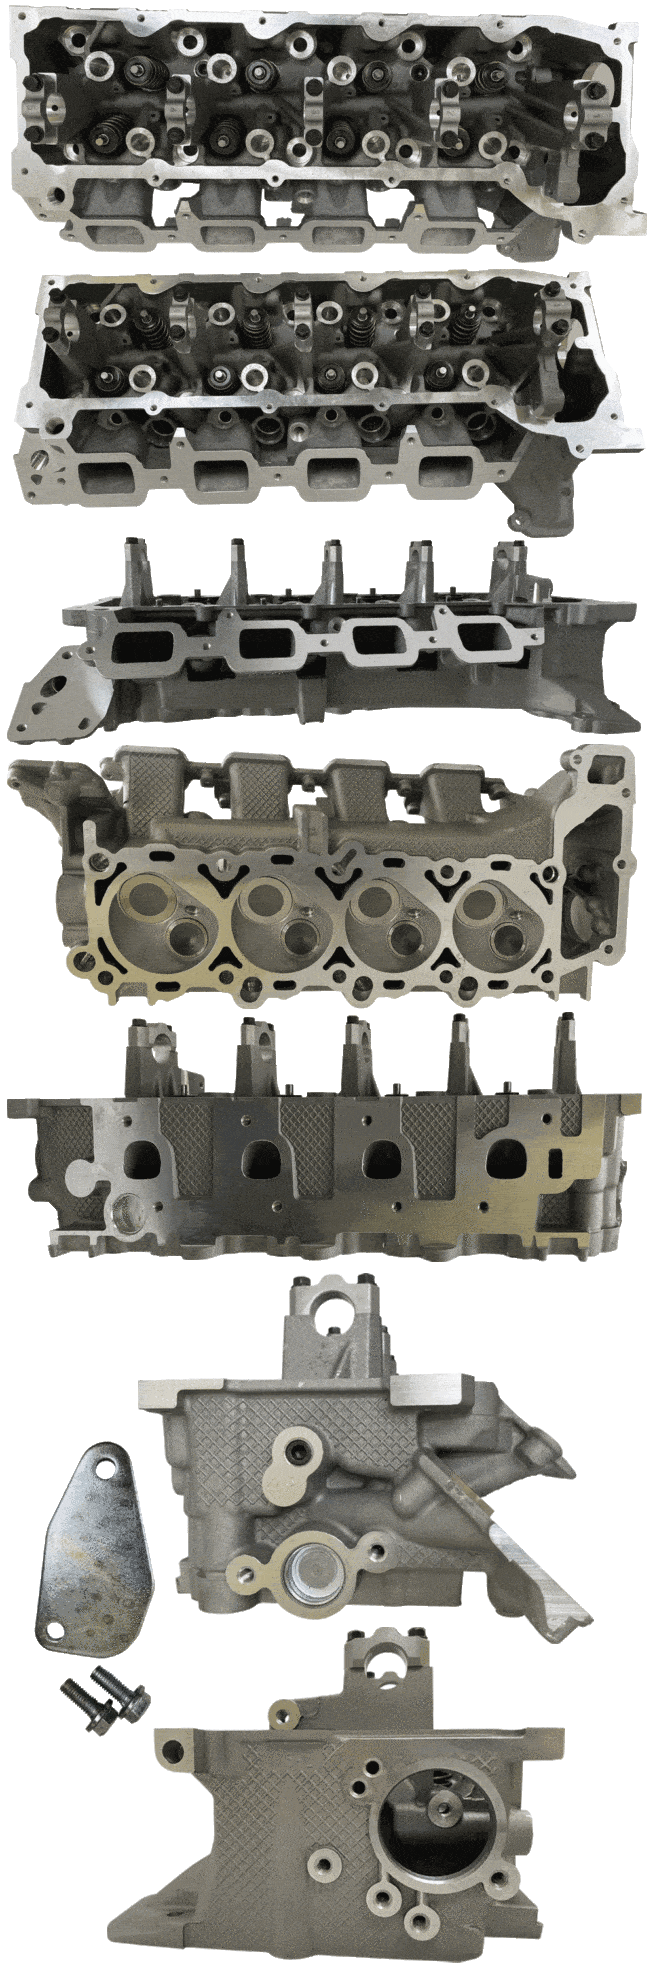 Dodge, Cylinder Head Chrysler Jeep 4.7 Right 99-08 - Valves And Springs New